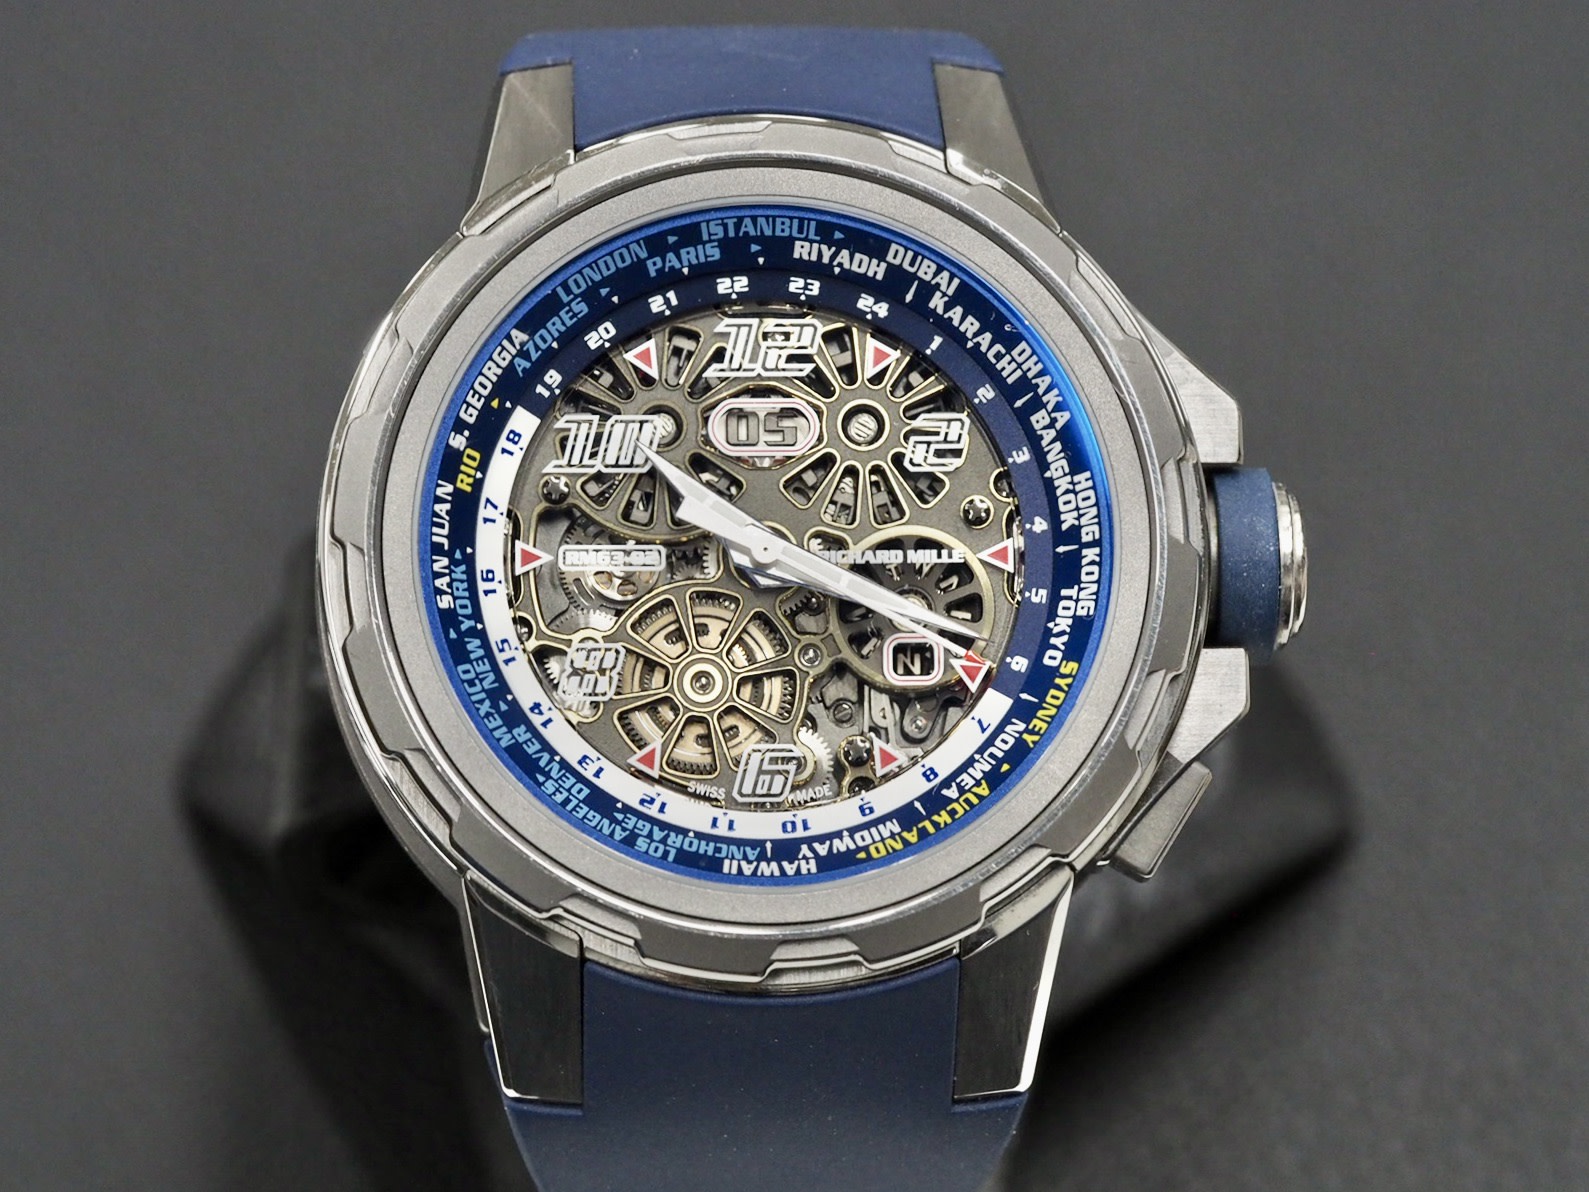 The RM63-02 combines Richard Mille's avante-garde design with a traditional and highly practical complication. 0